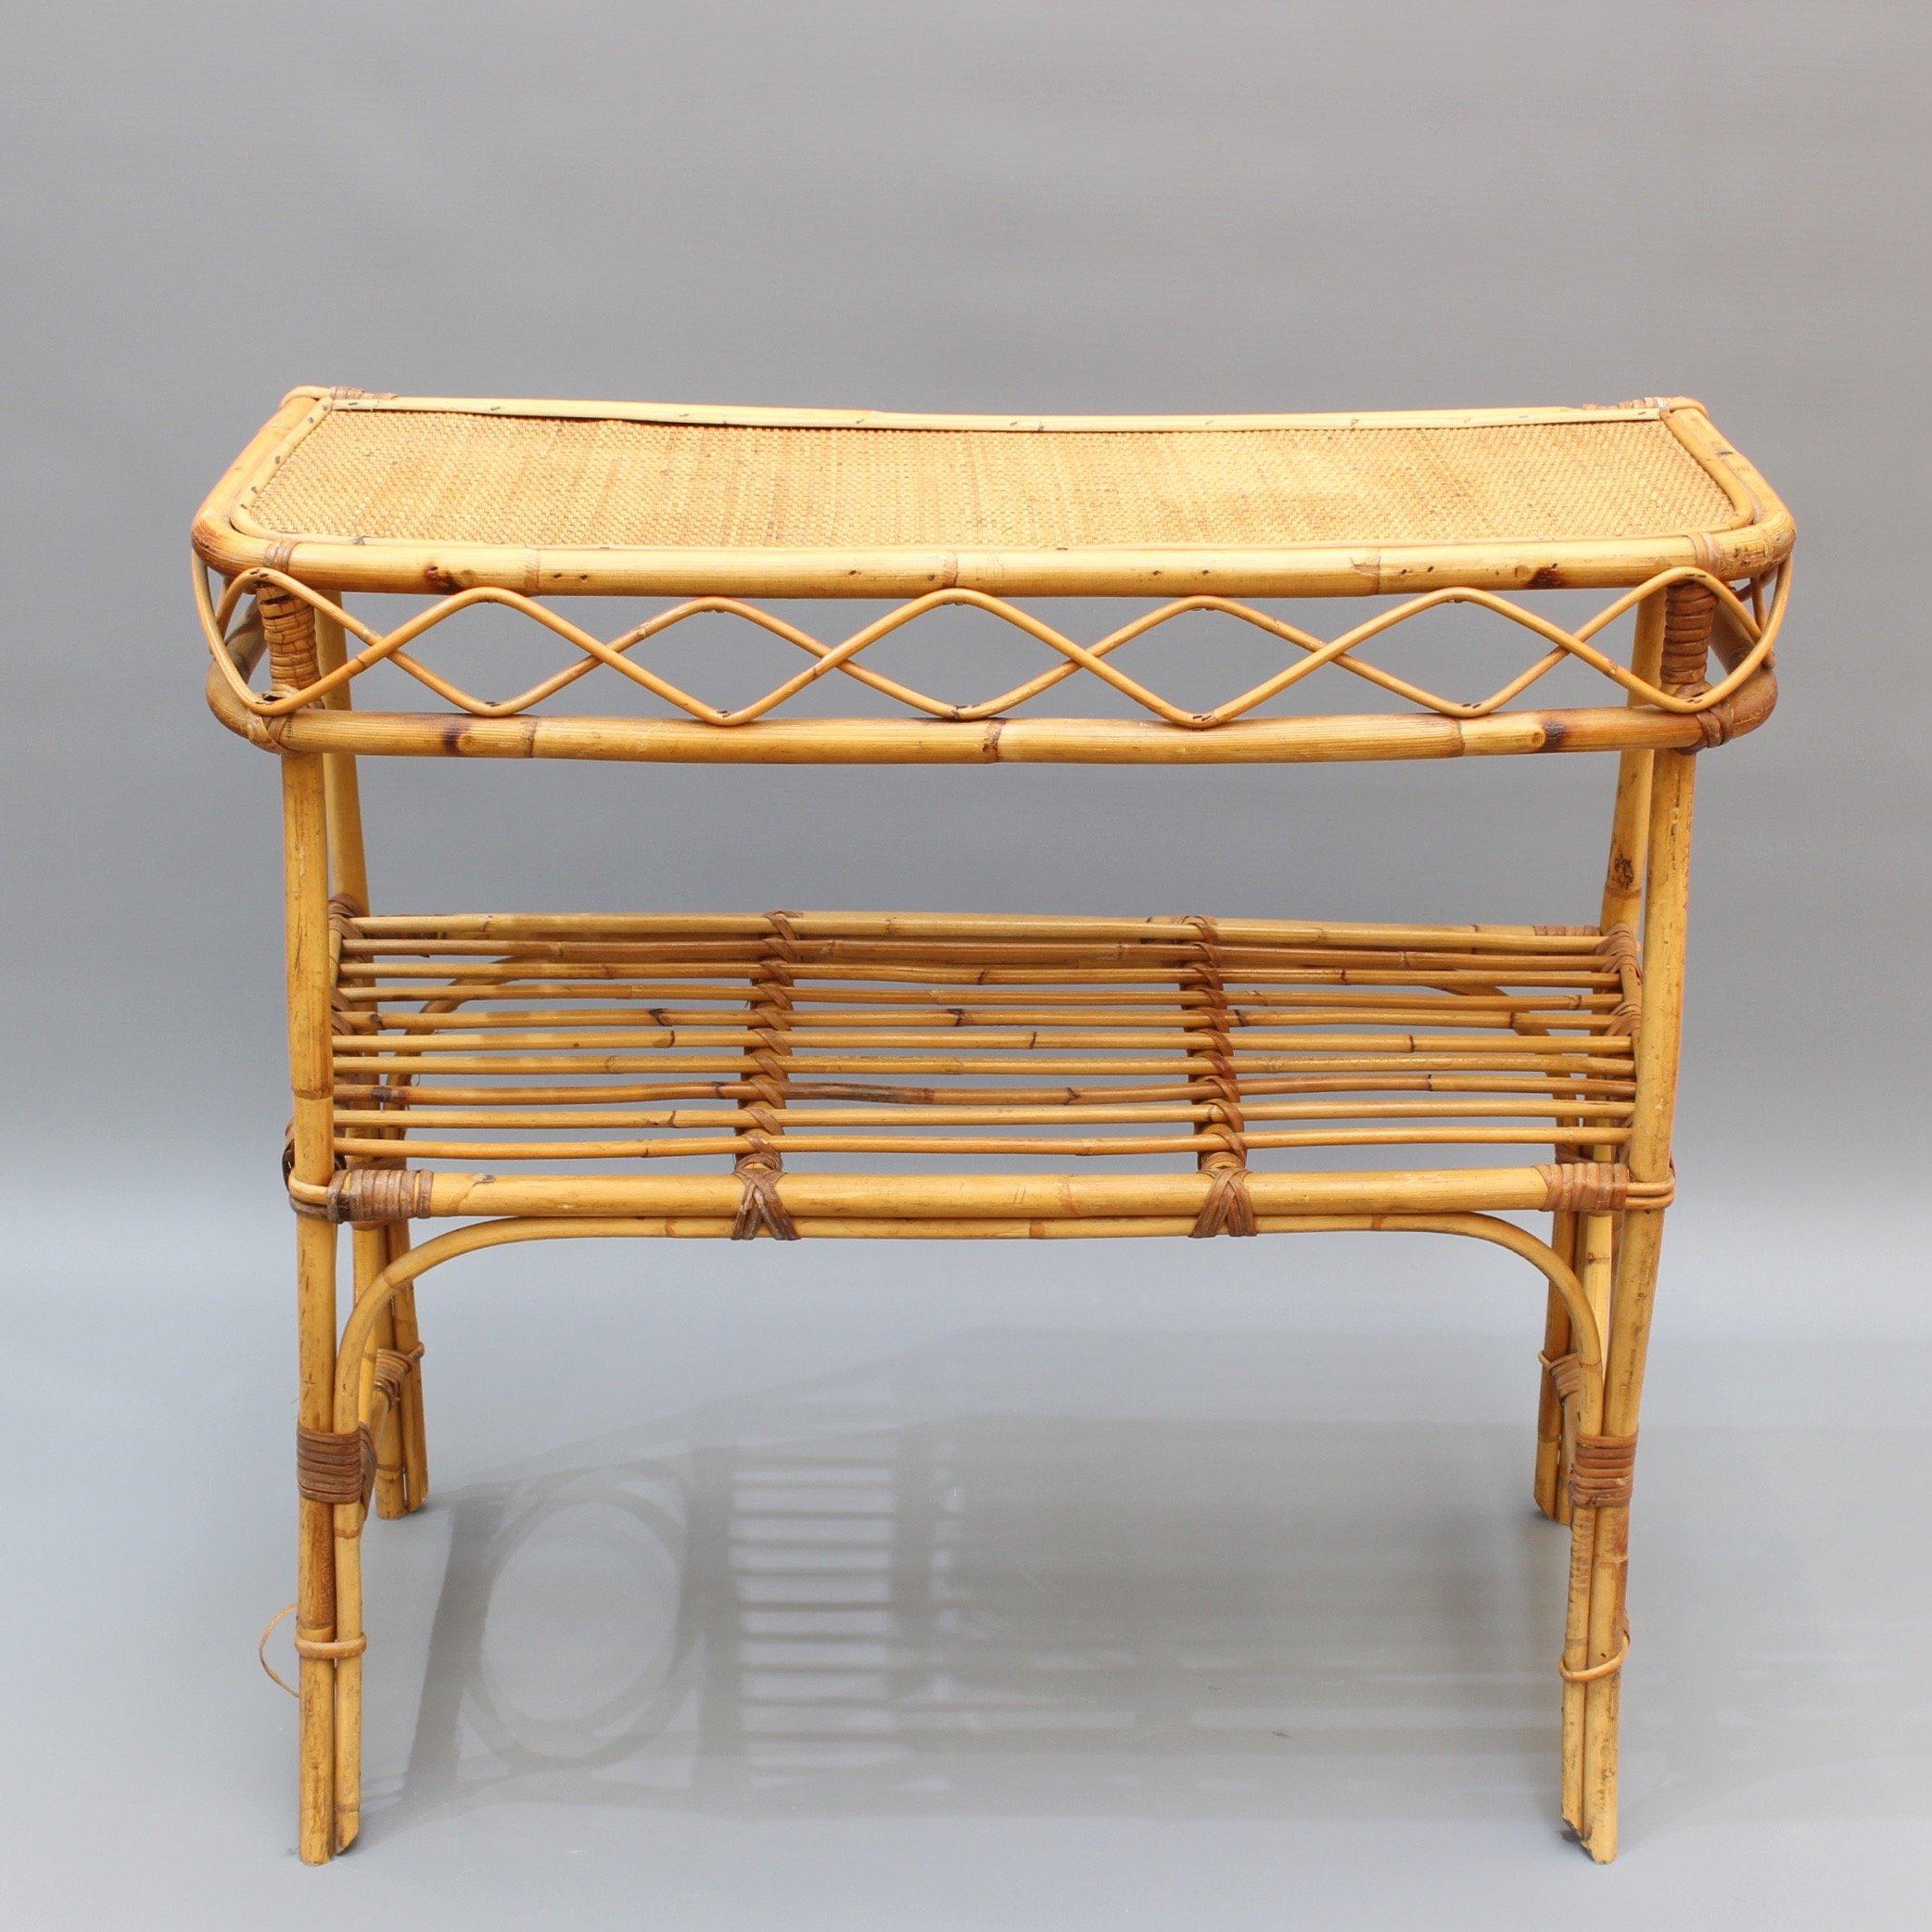 Italian rattan and bamboo console table (circa 1960s). A very stylish piece with a slew of character and charm. There are two horizontal surfaces for storage or display, the top made of tightly woven wicker. The smart-looking bamboo legs and frame